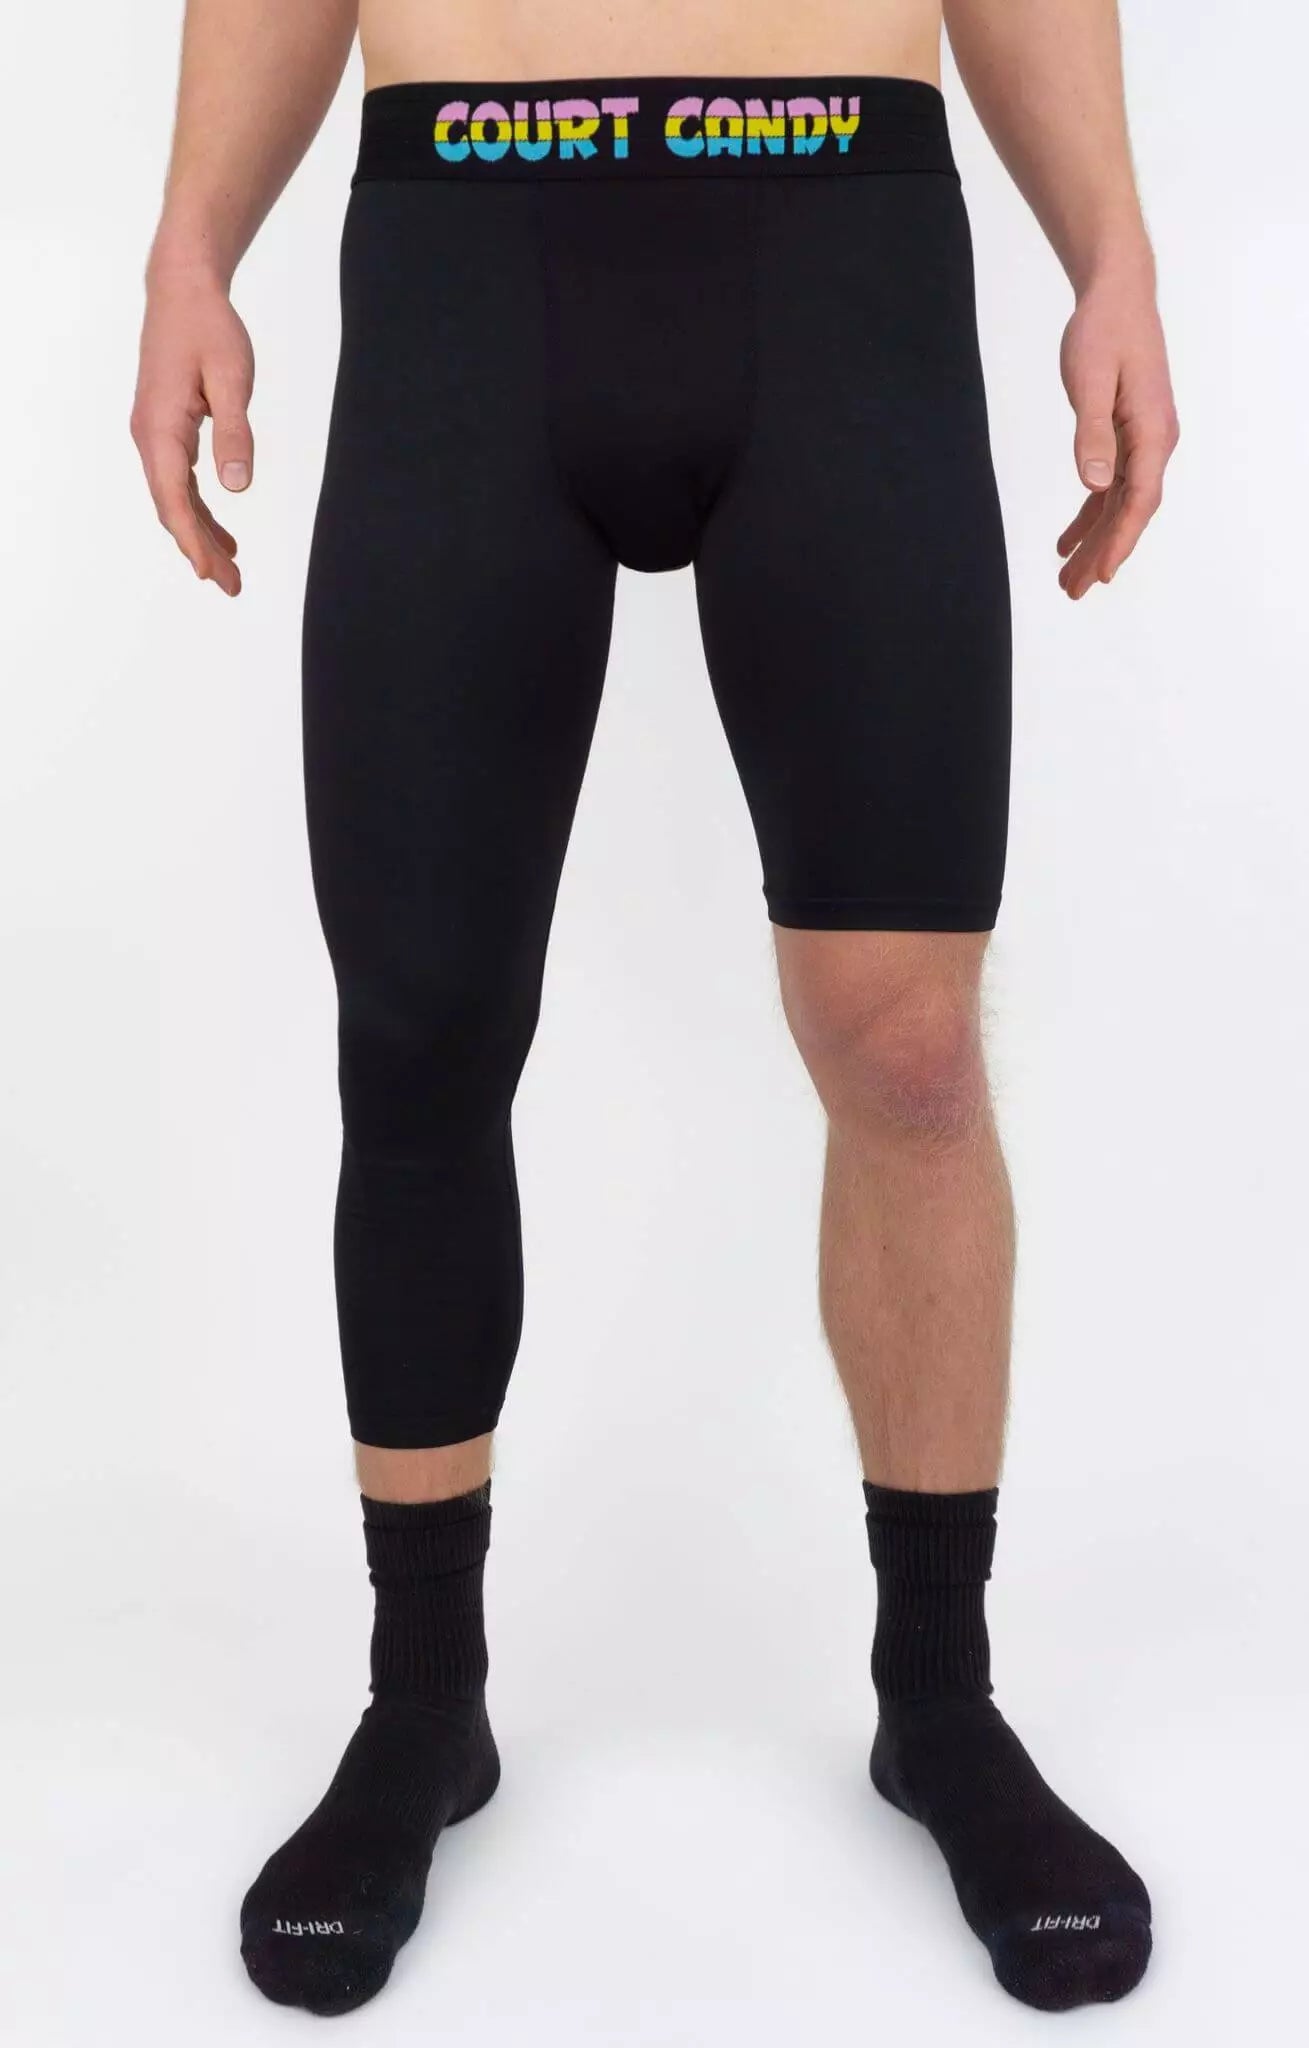 One Leg COMPRESSION PANTS– Team Courtsmith